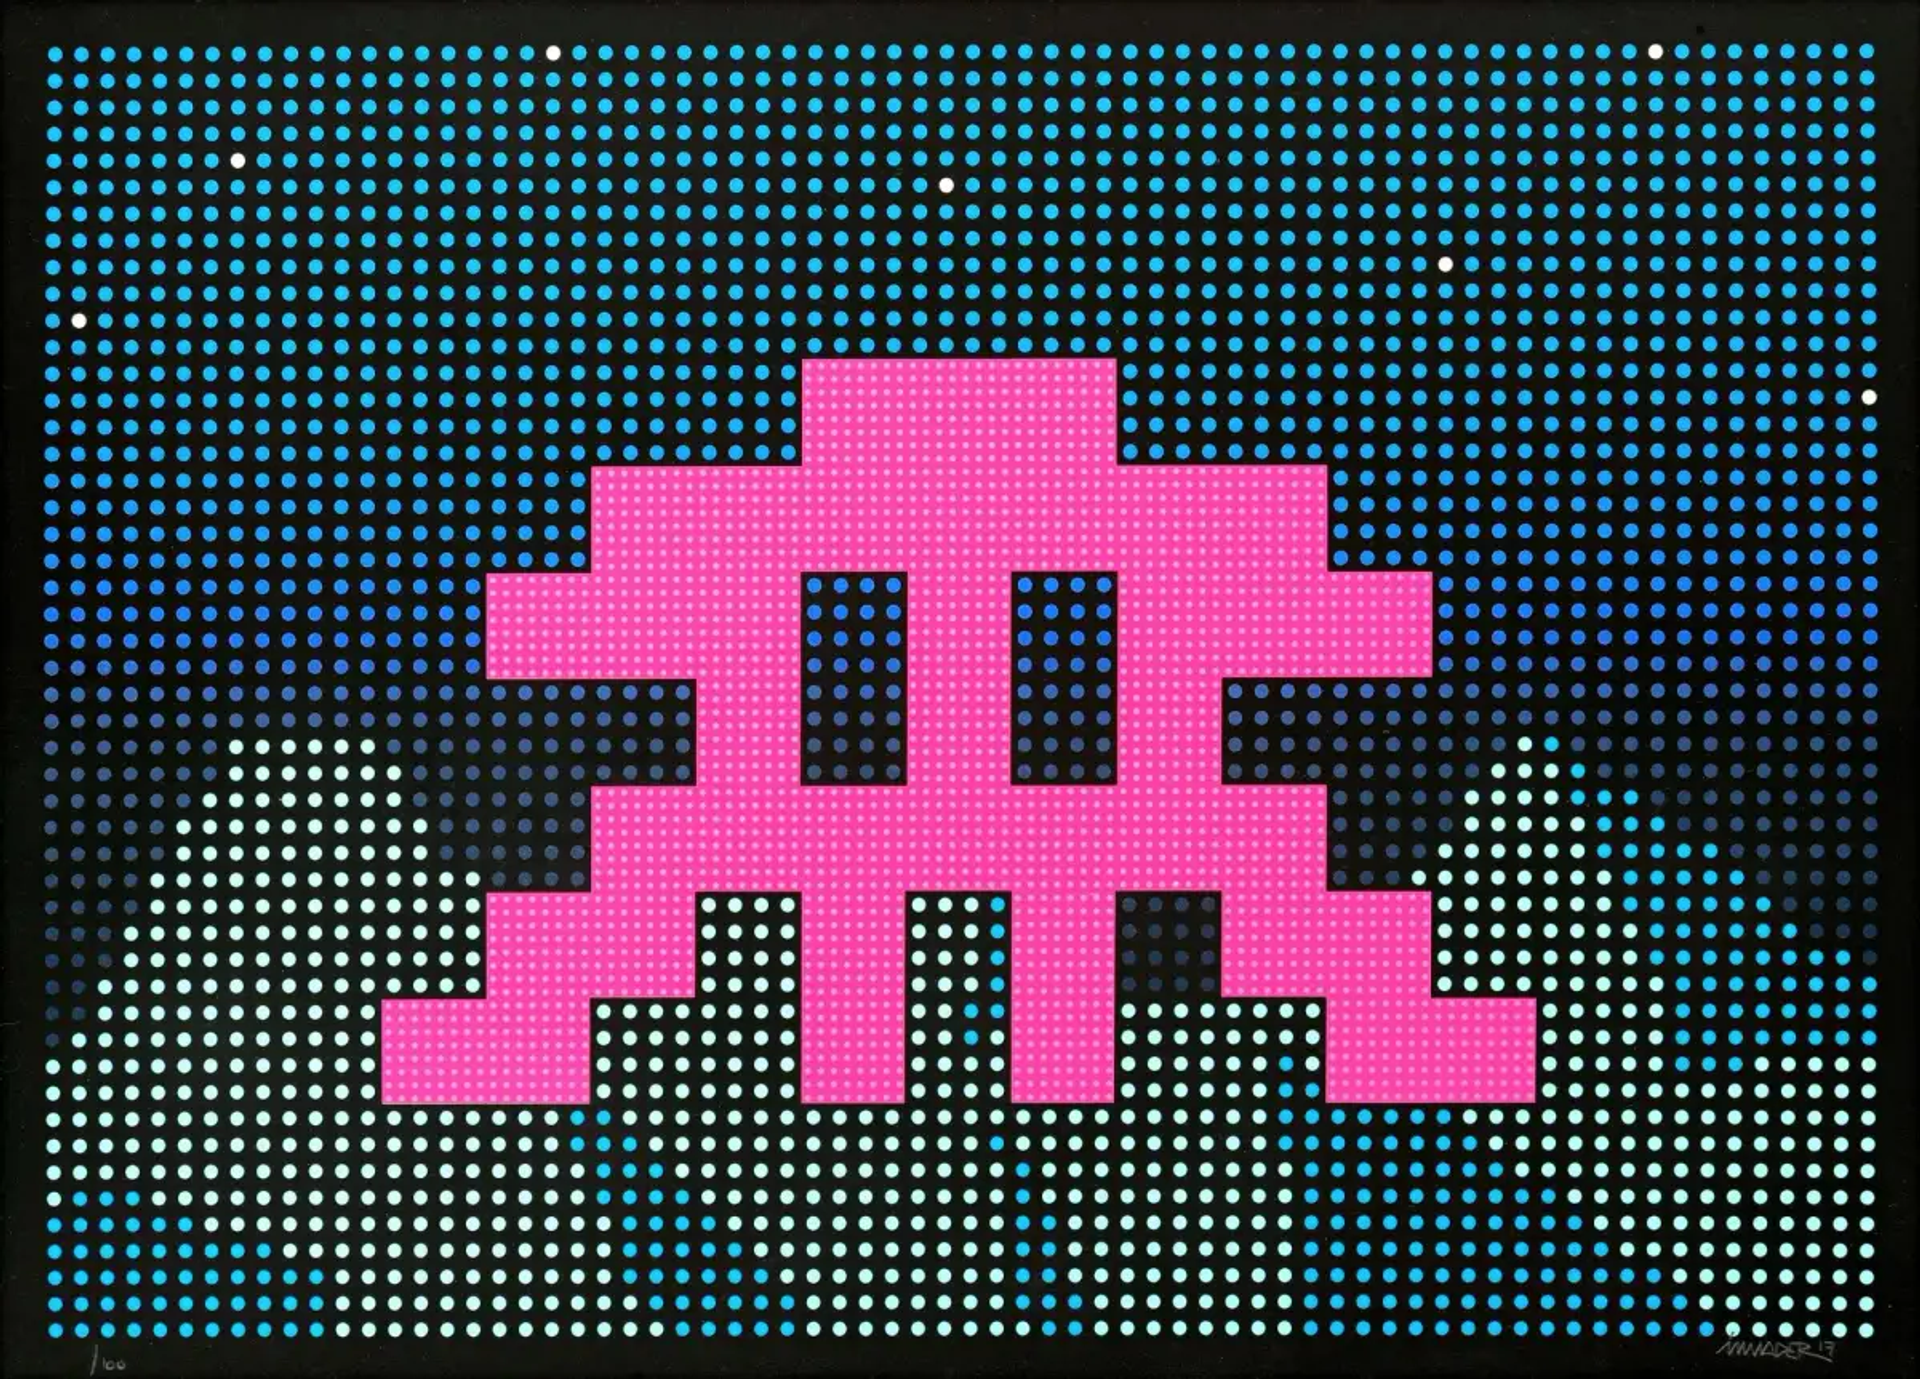 In this print, the character Space invader is depicted in a bright pink, set against a black drop upon which dots of various colours have been placed in a regular formation. Resembling an LED screen, as the title would suggest, the dots form a background image of mountains against a night sky. The image in its entirety mimics a retro video game screen, giving the sense that one is looking at a video game, rather than an artwork.